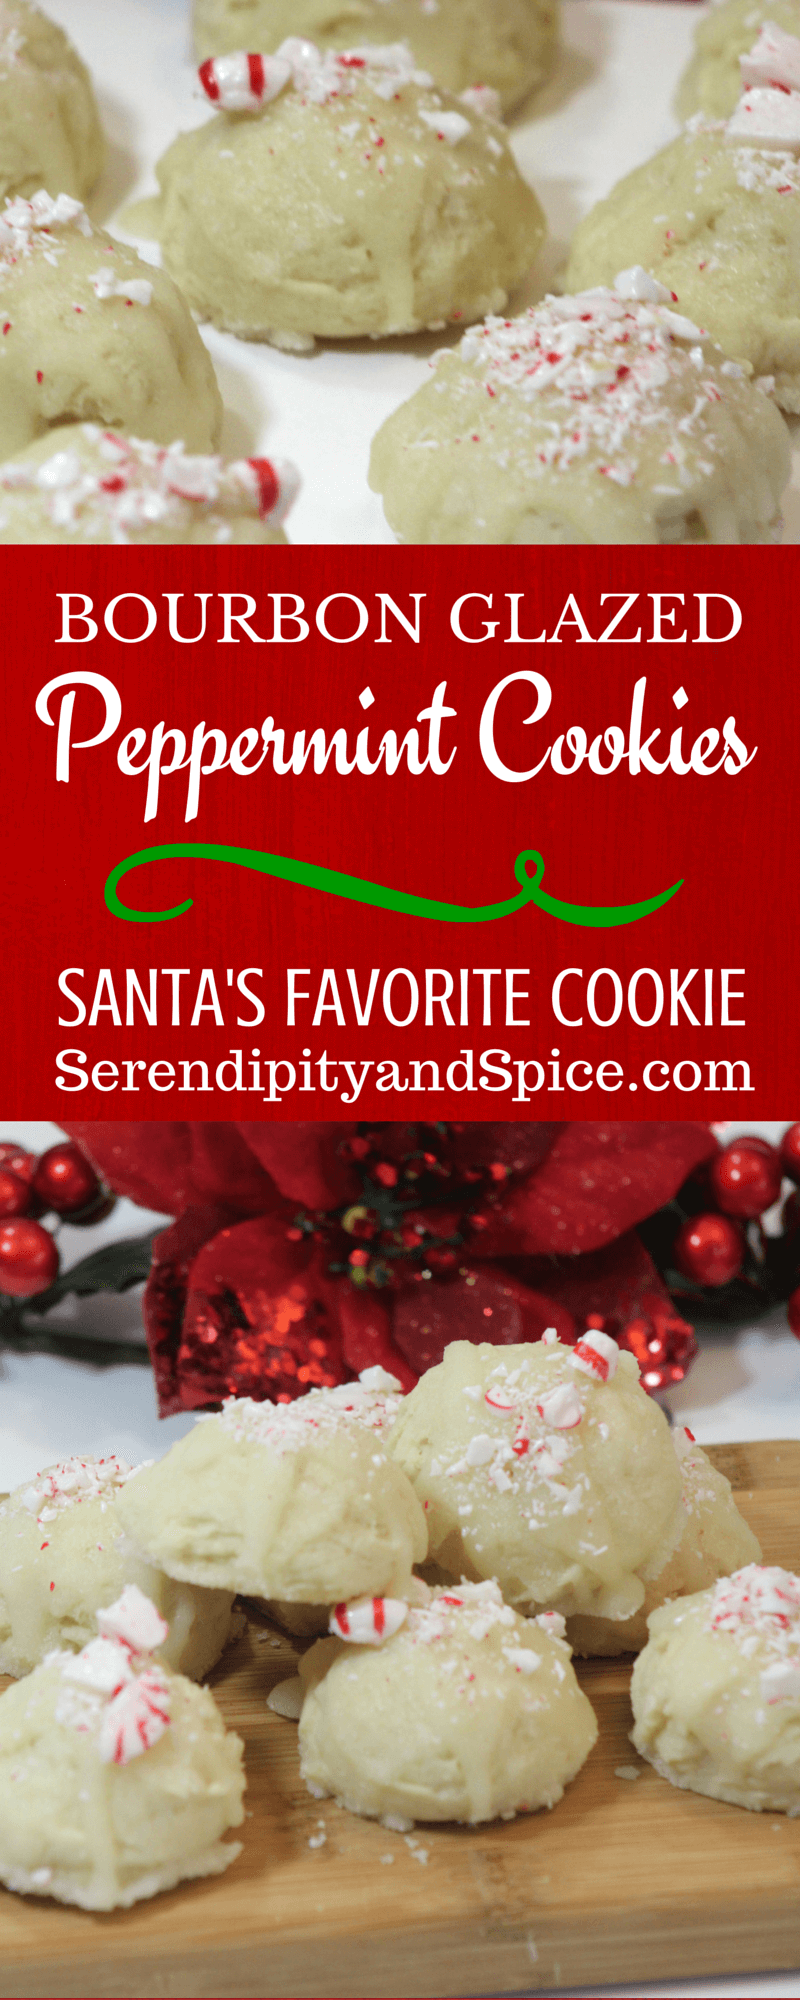 Bourbon Glazed Peppermint Cookies - PIN THIS ONE